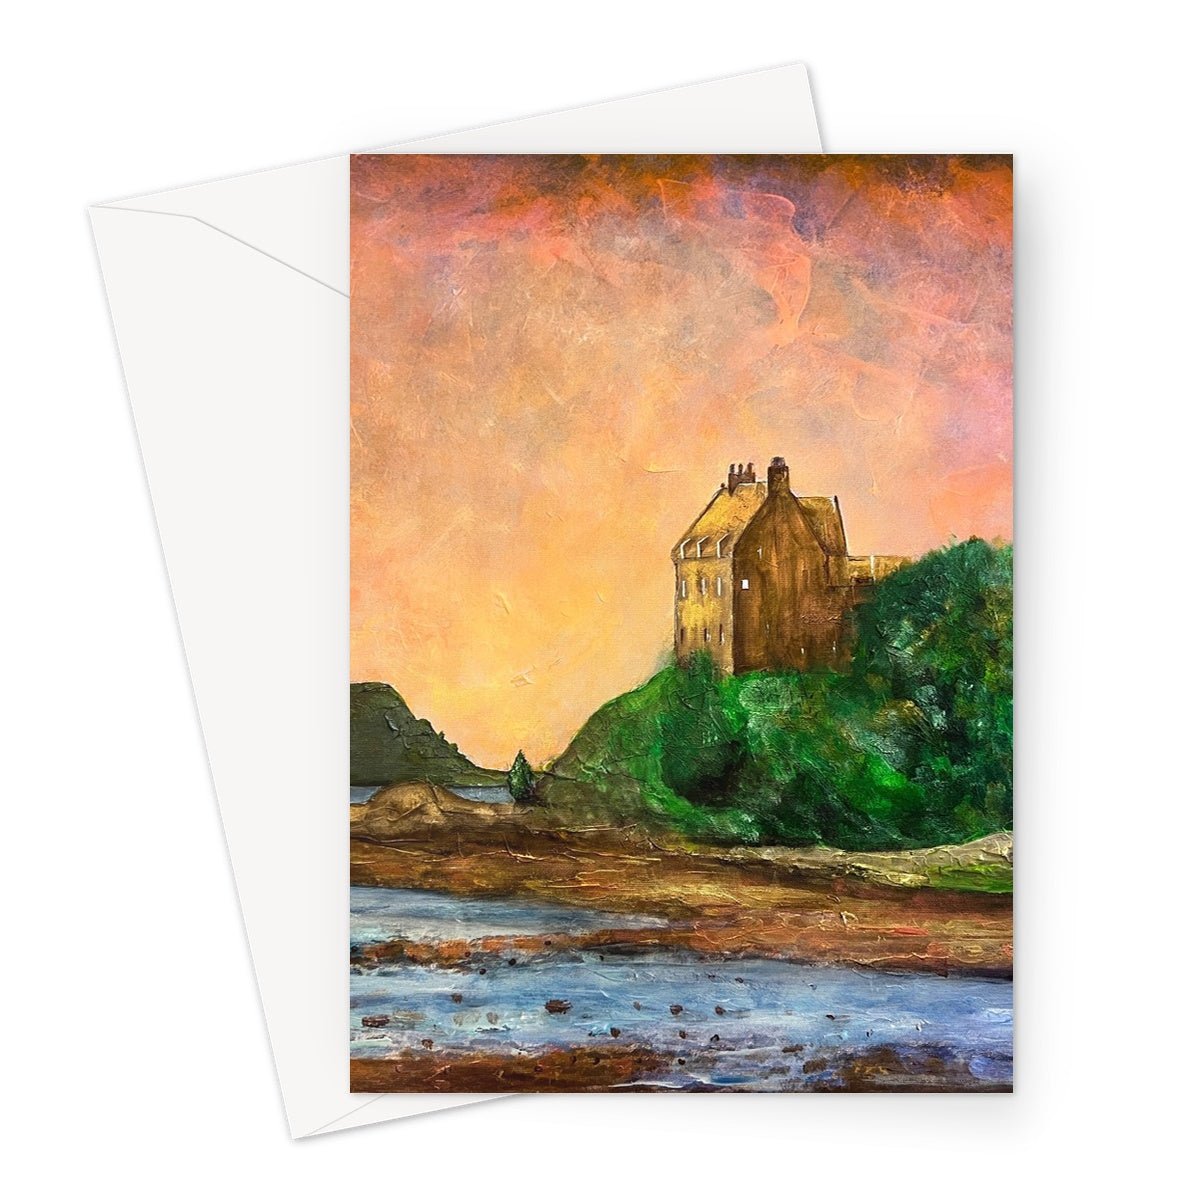 Duntrune Castle Art Gifts Greeting Card-Greetings Cards-Scottish Castles Art Gallery-A5 Portrait-1 Card-Paintings, Prints, Homeware, Art Gifts From Scotland By Scottish Artist Kevin Hunter